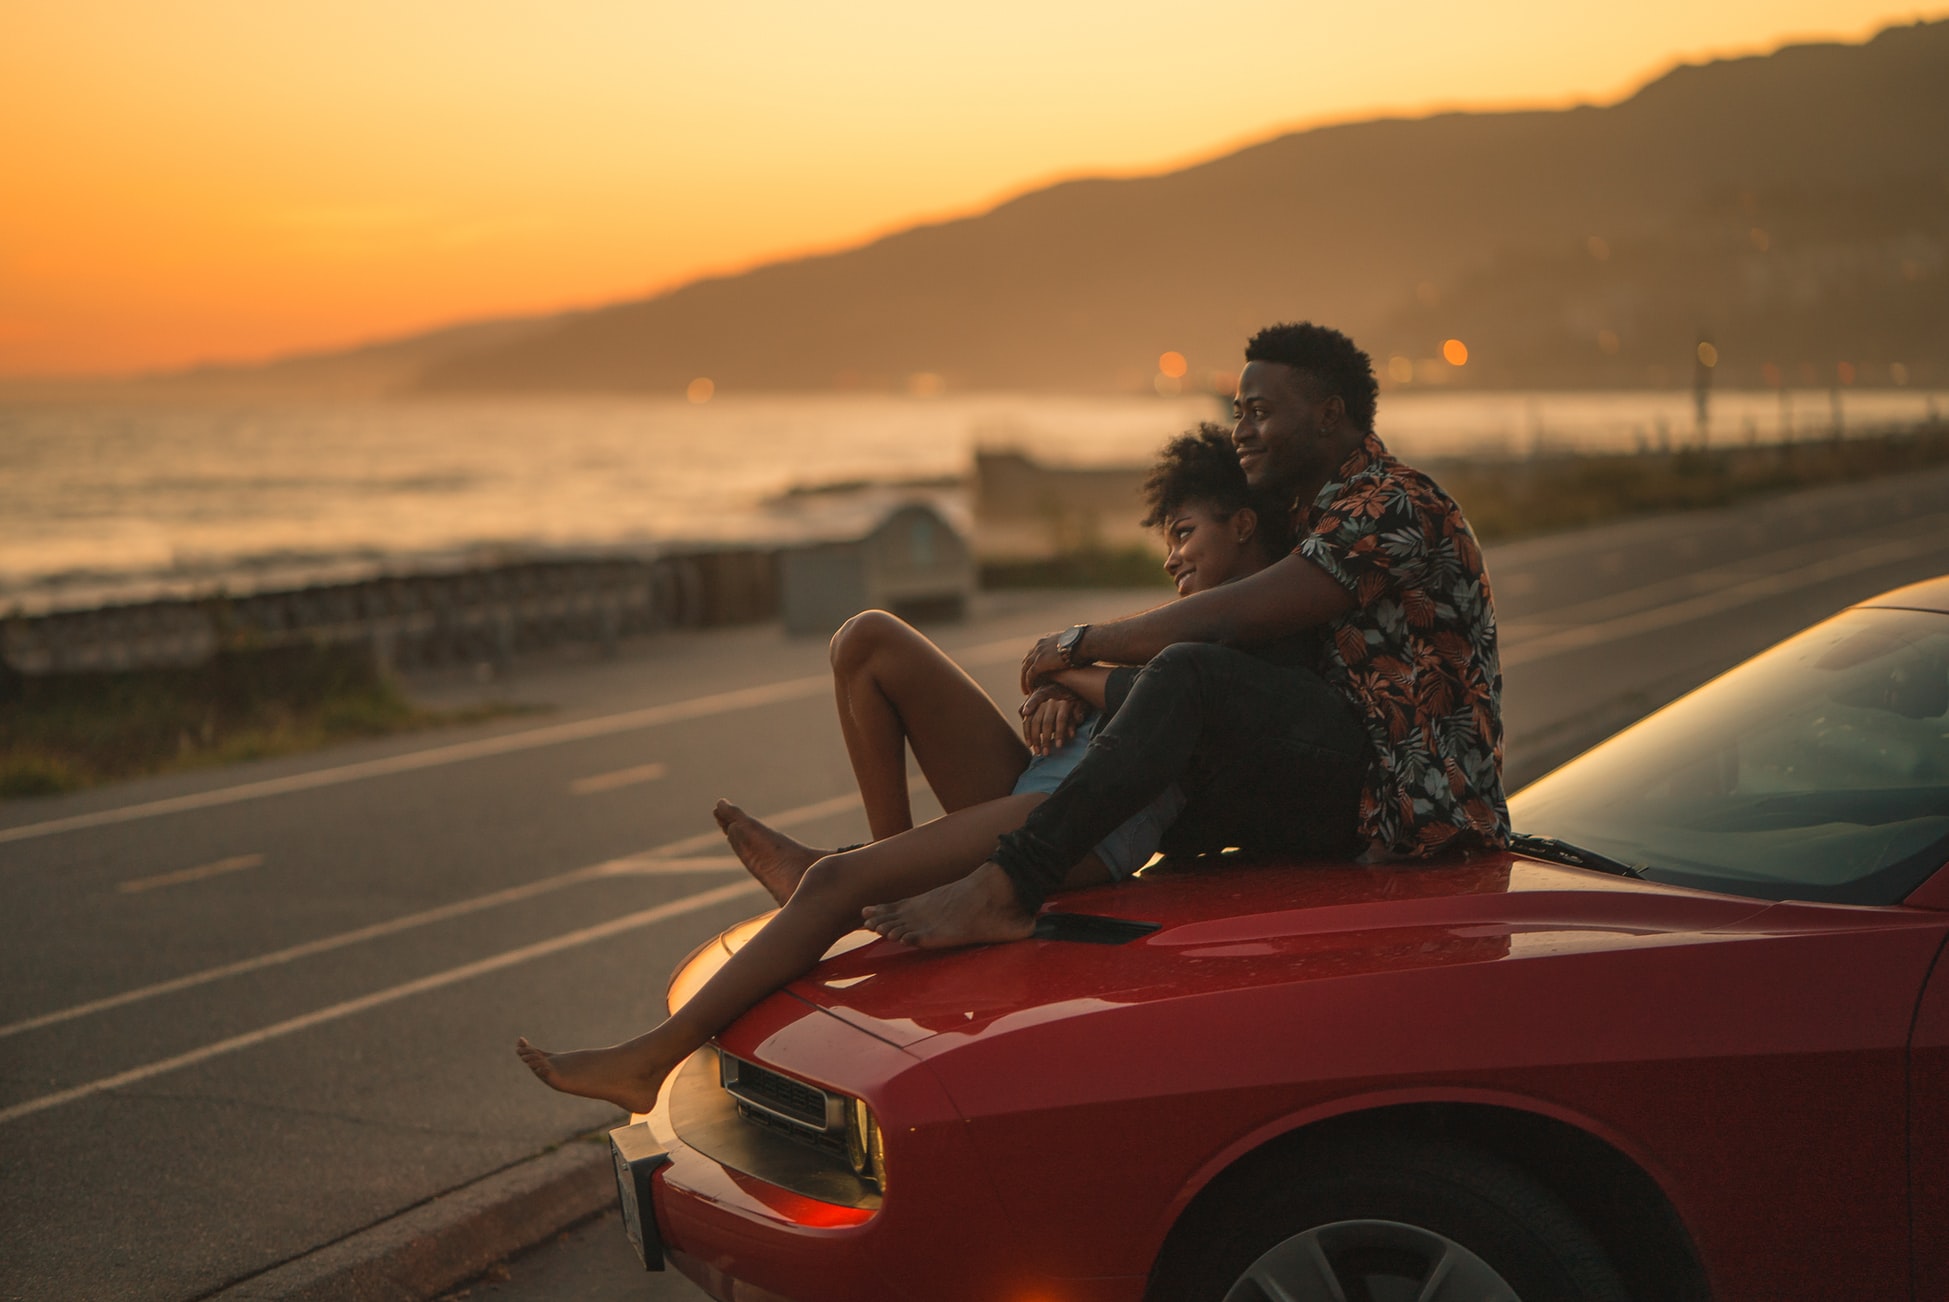 single dad on a date sitting with woman on hood of red car looking at the sunset over the ocean